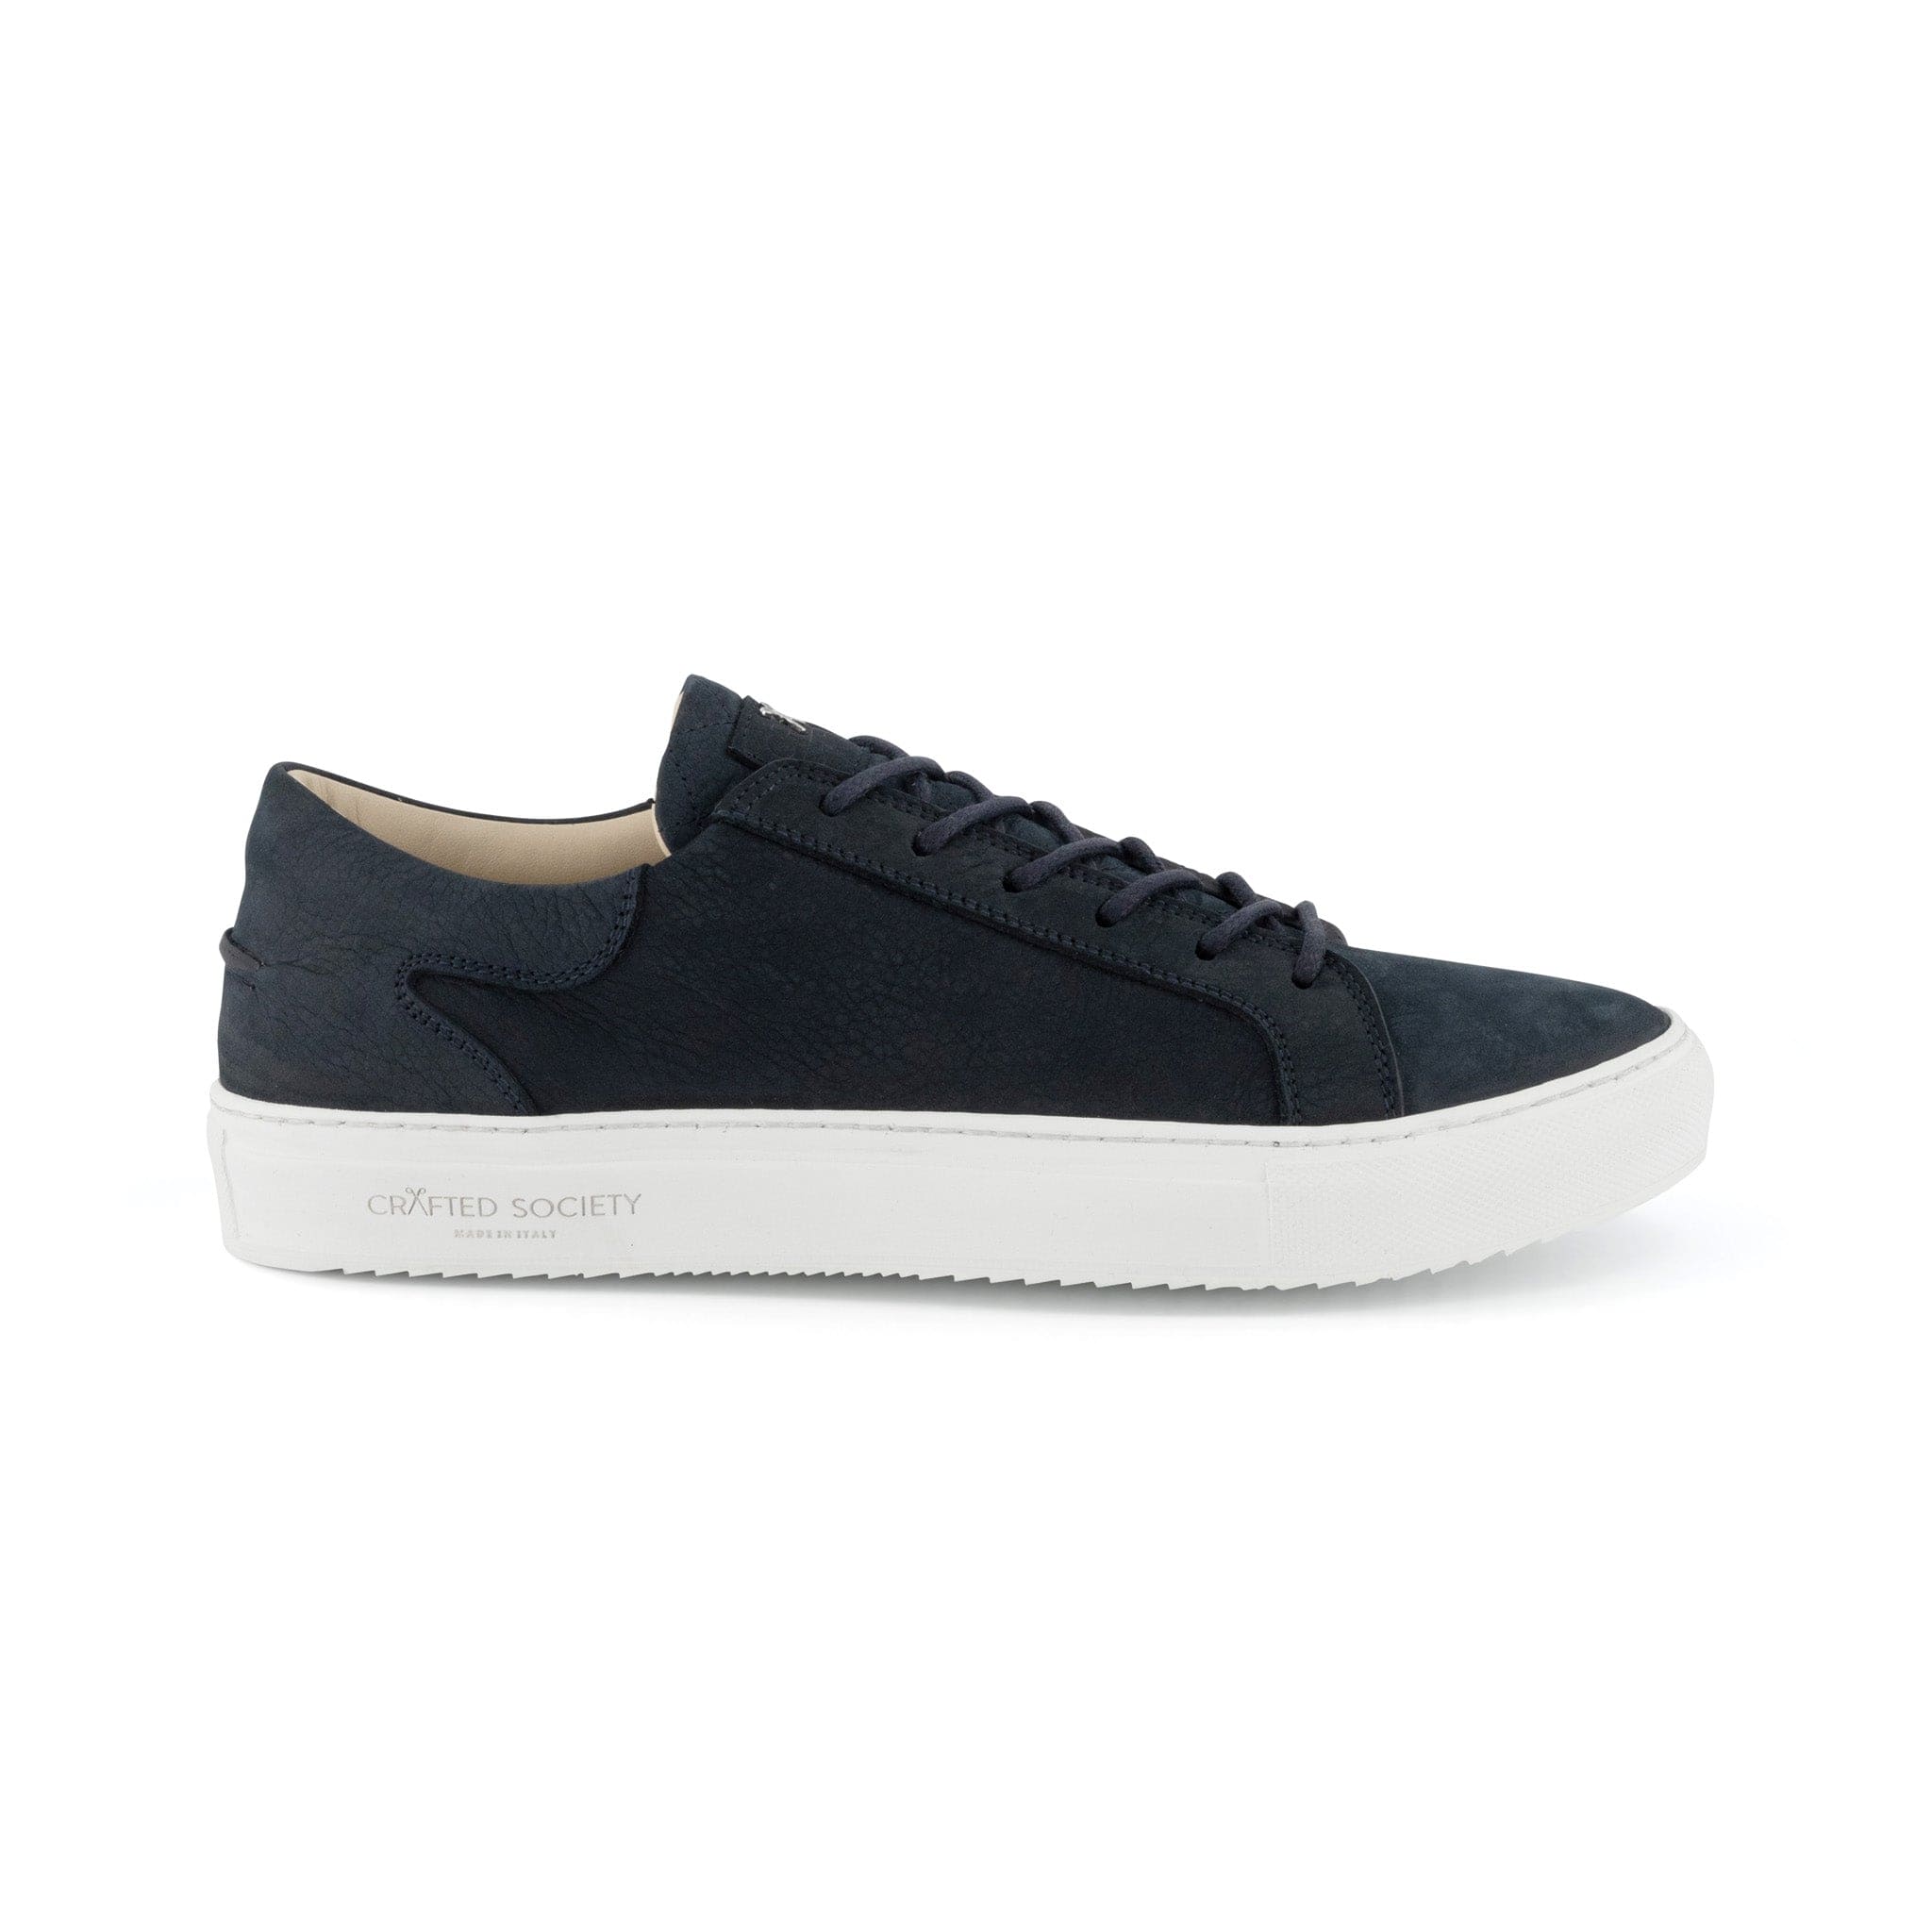 Mario Low Refined Sneaker | Navy Nubuck | White Outsole | Made in Italy | Sizes 38, 39, 40 & 41